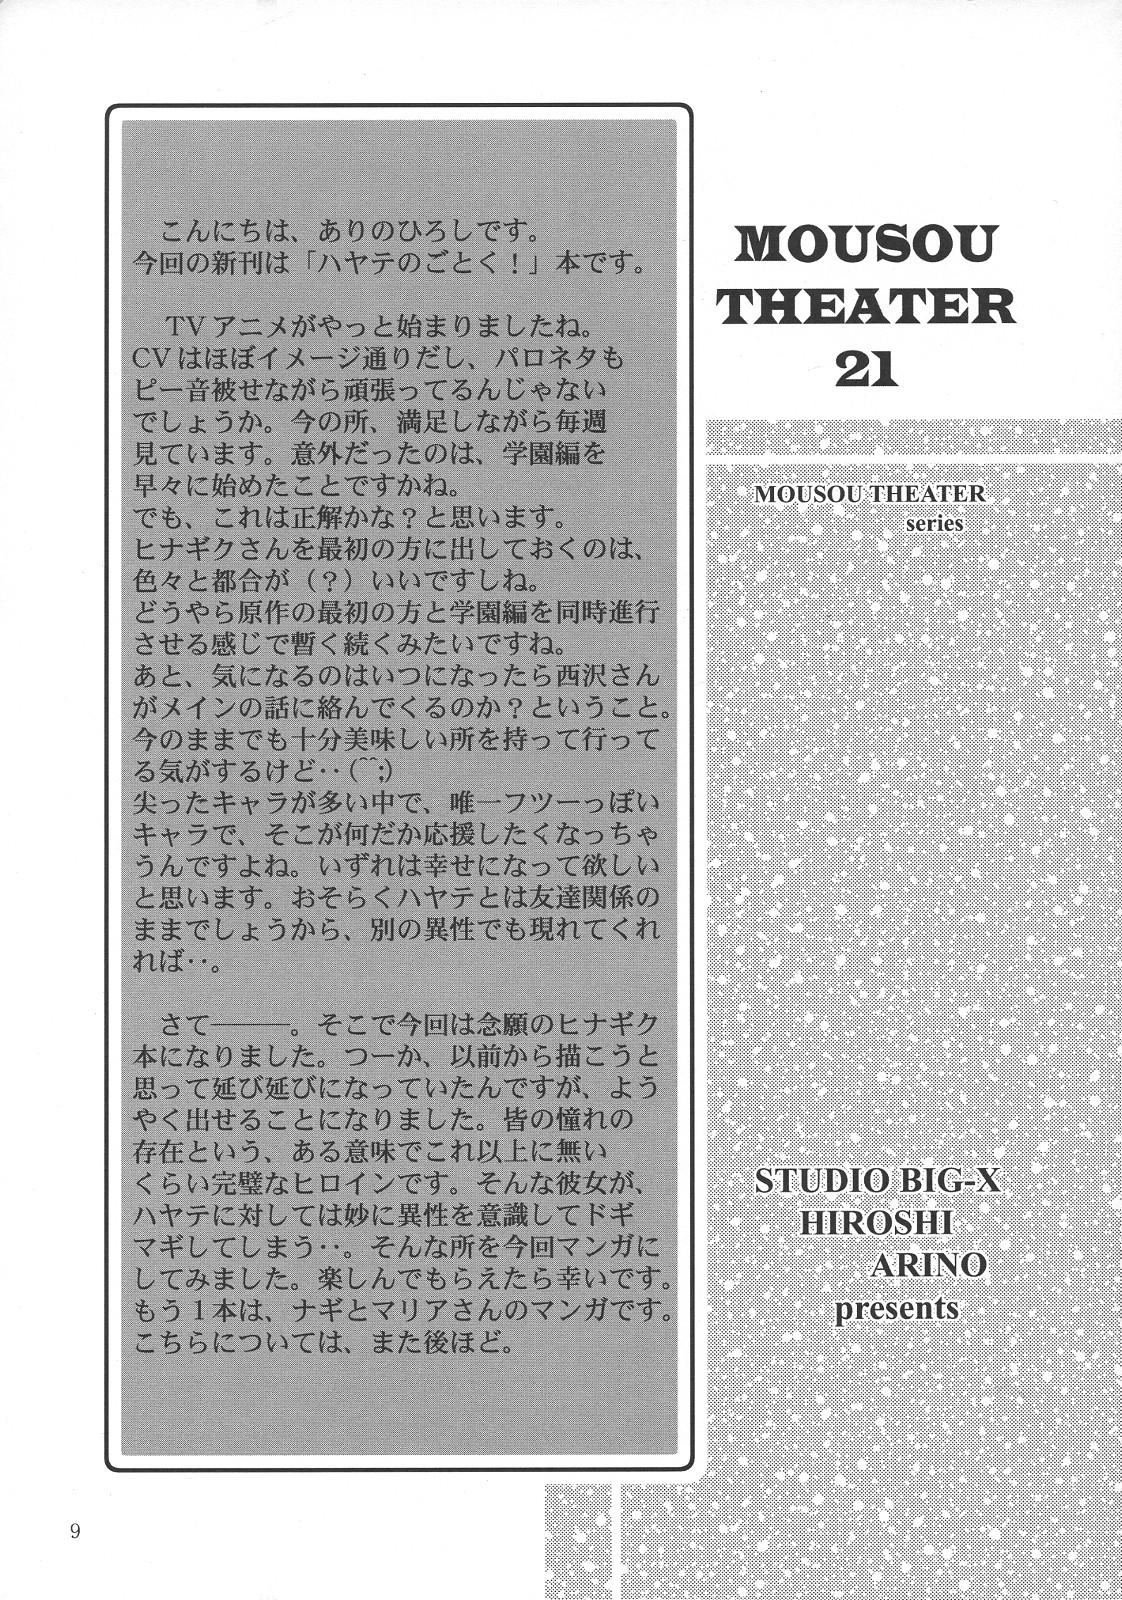 MOUSOU THEATER 21 7